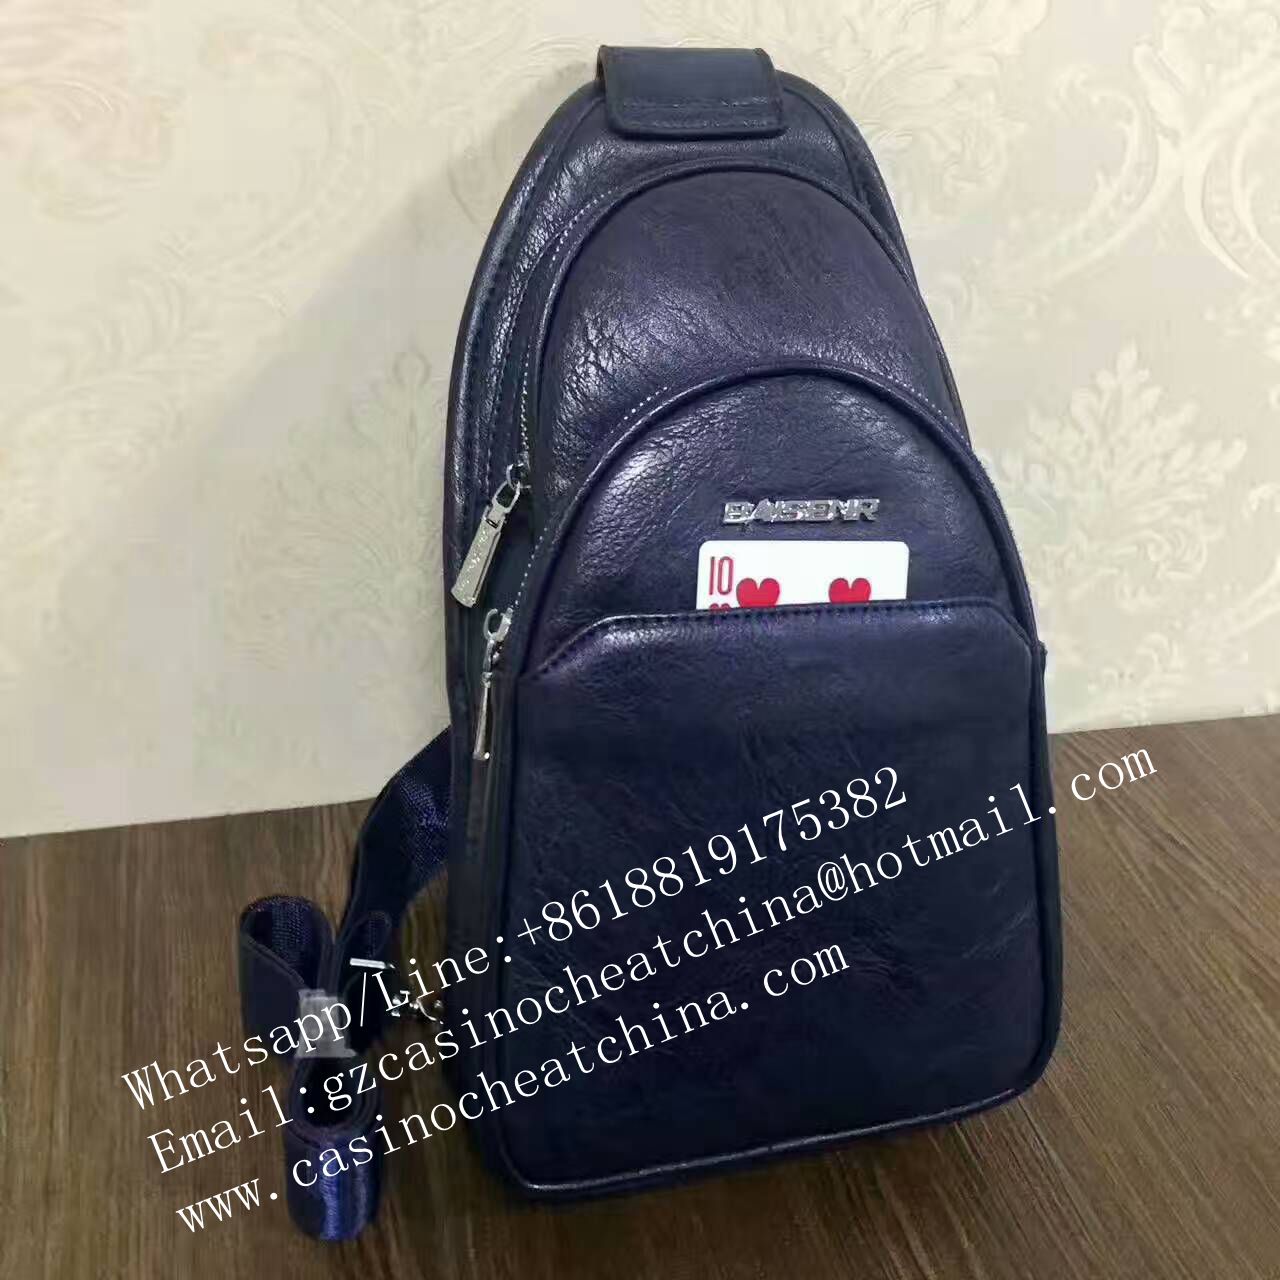 Poker exchange shoulder bag for poker cheating device/exchange poker cards/magic trick/casino cheat/cards cheat